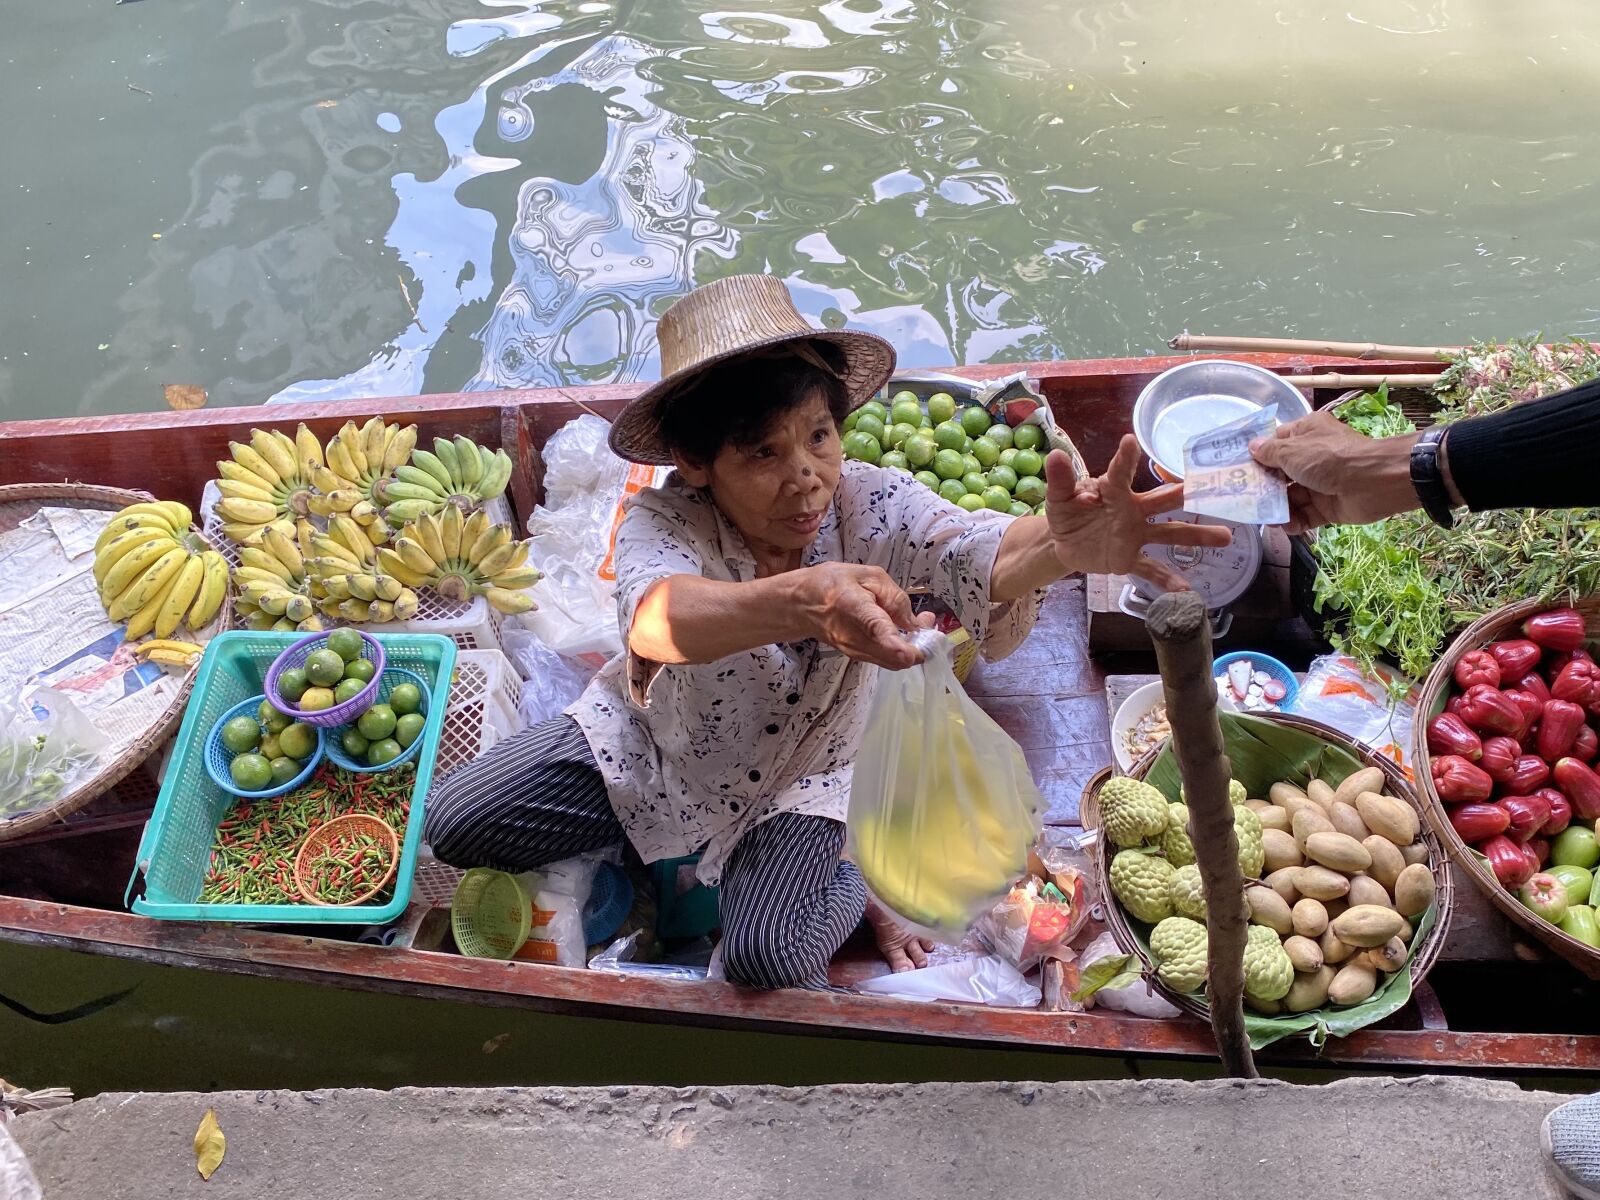 iPhone 11 Pro back triple camera 4.25mm f/1.8 sample photo. Woman, floating river, market photography